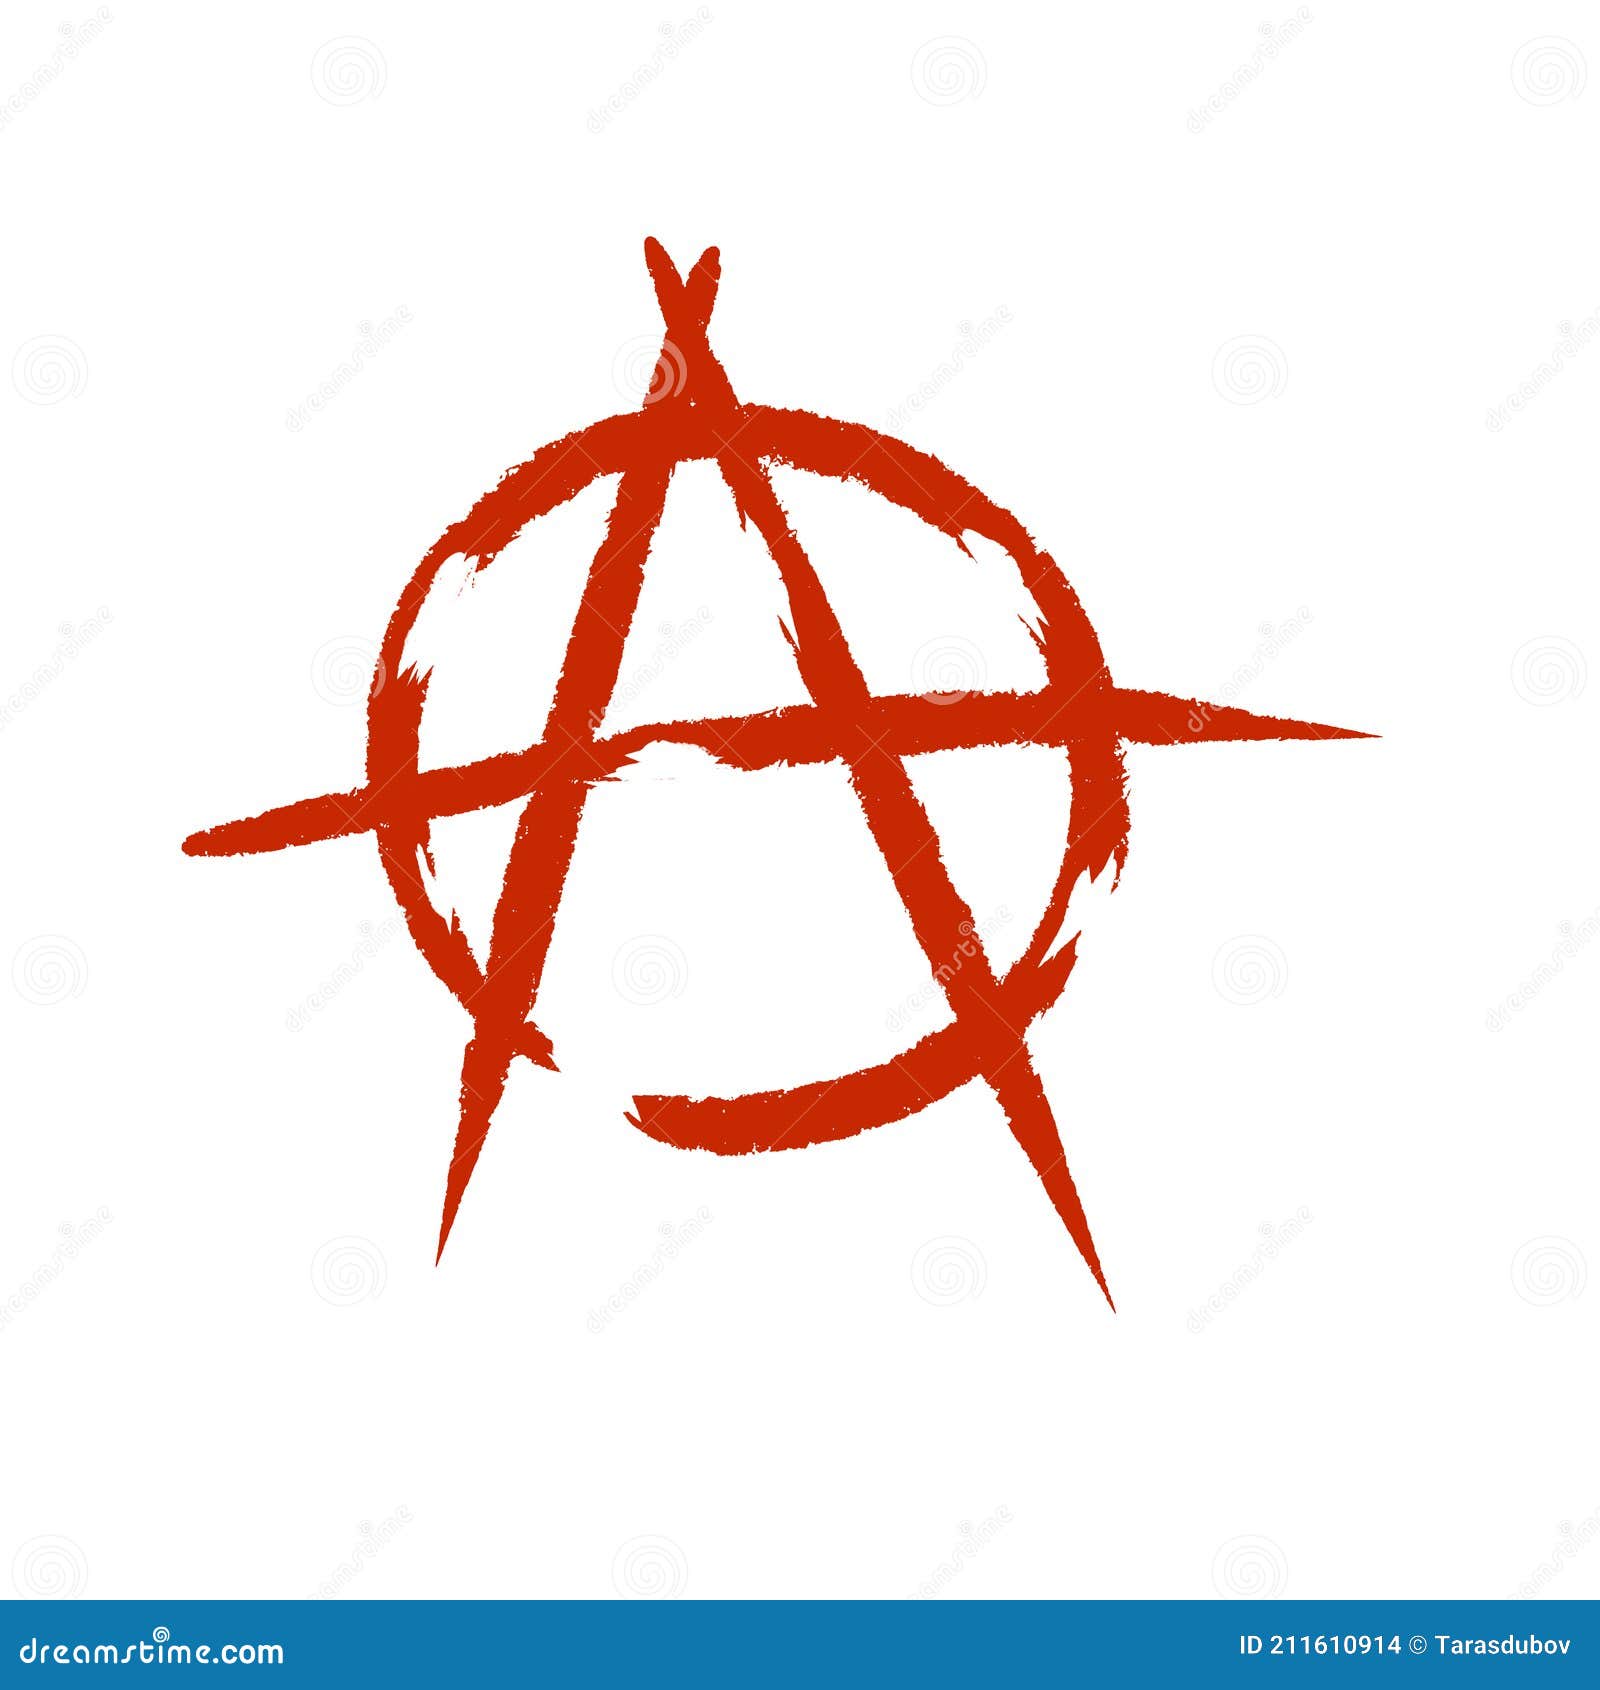 anarchy. letter a in the circle. a  of chaos and rebellion